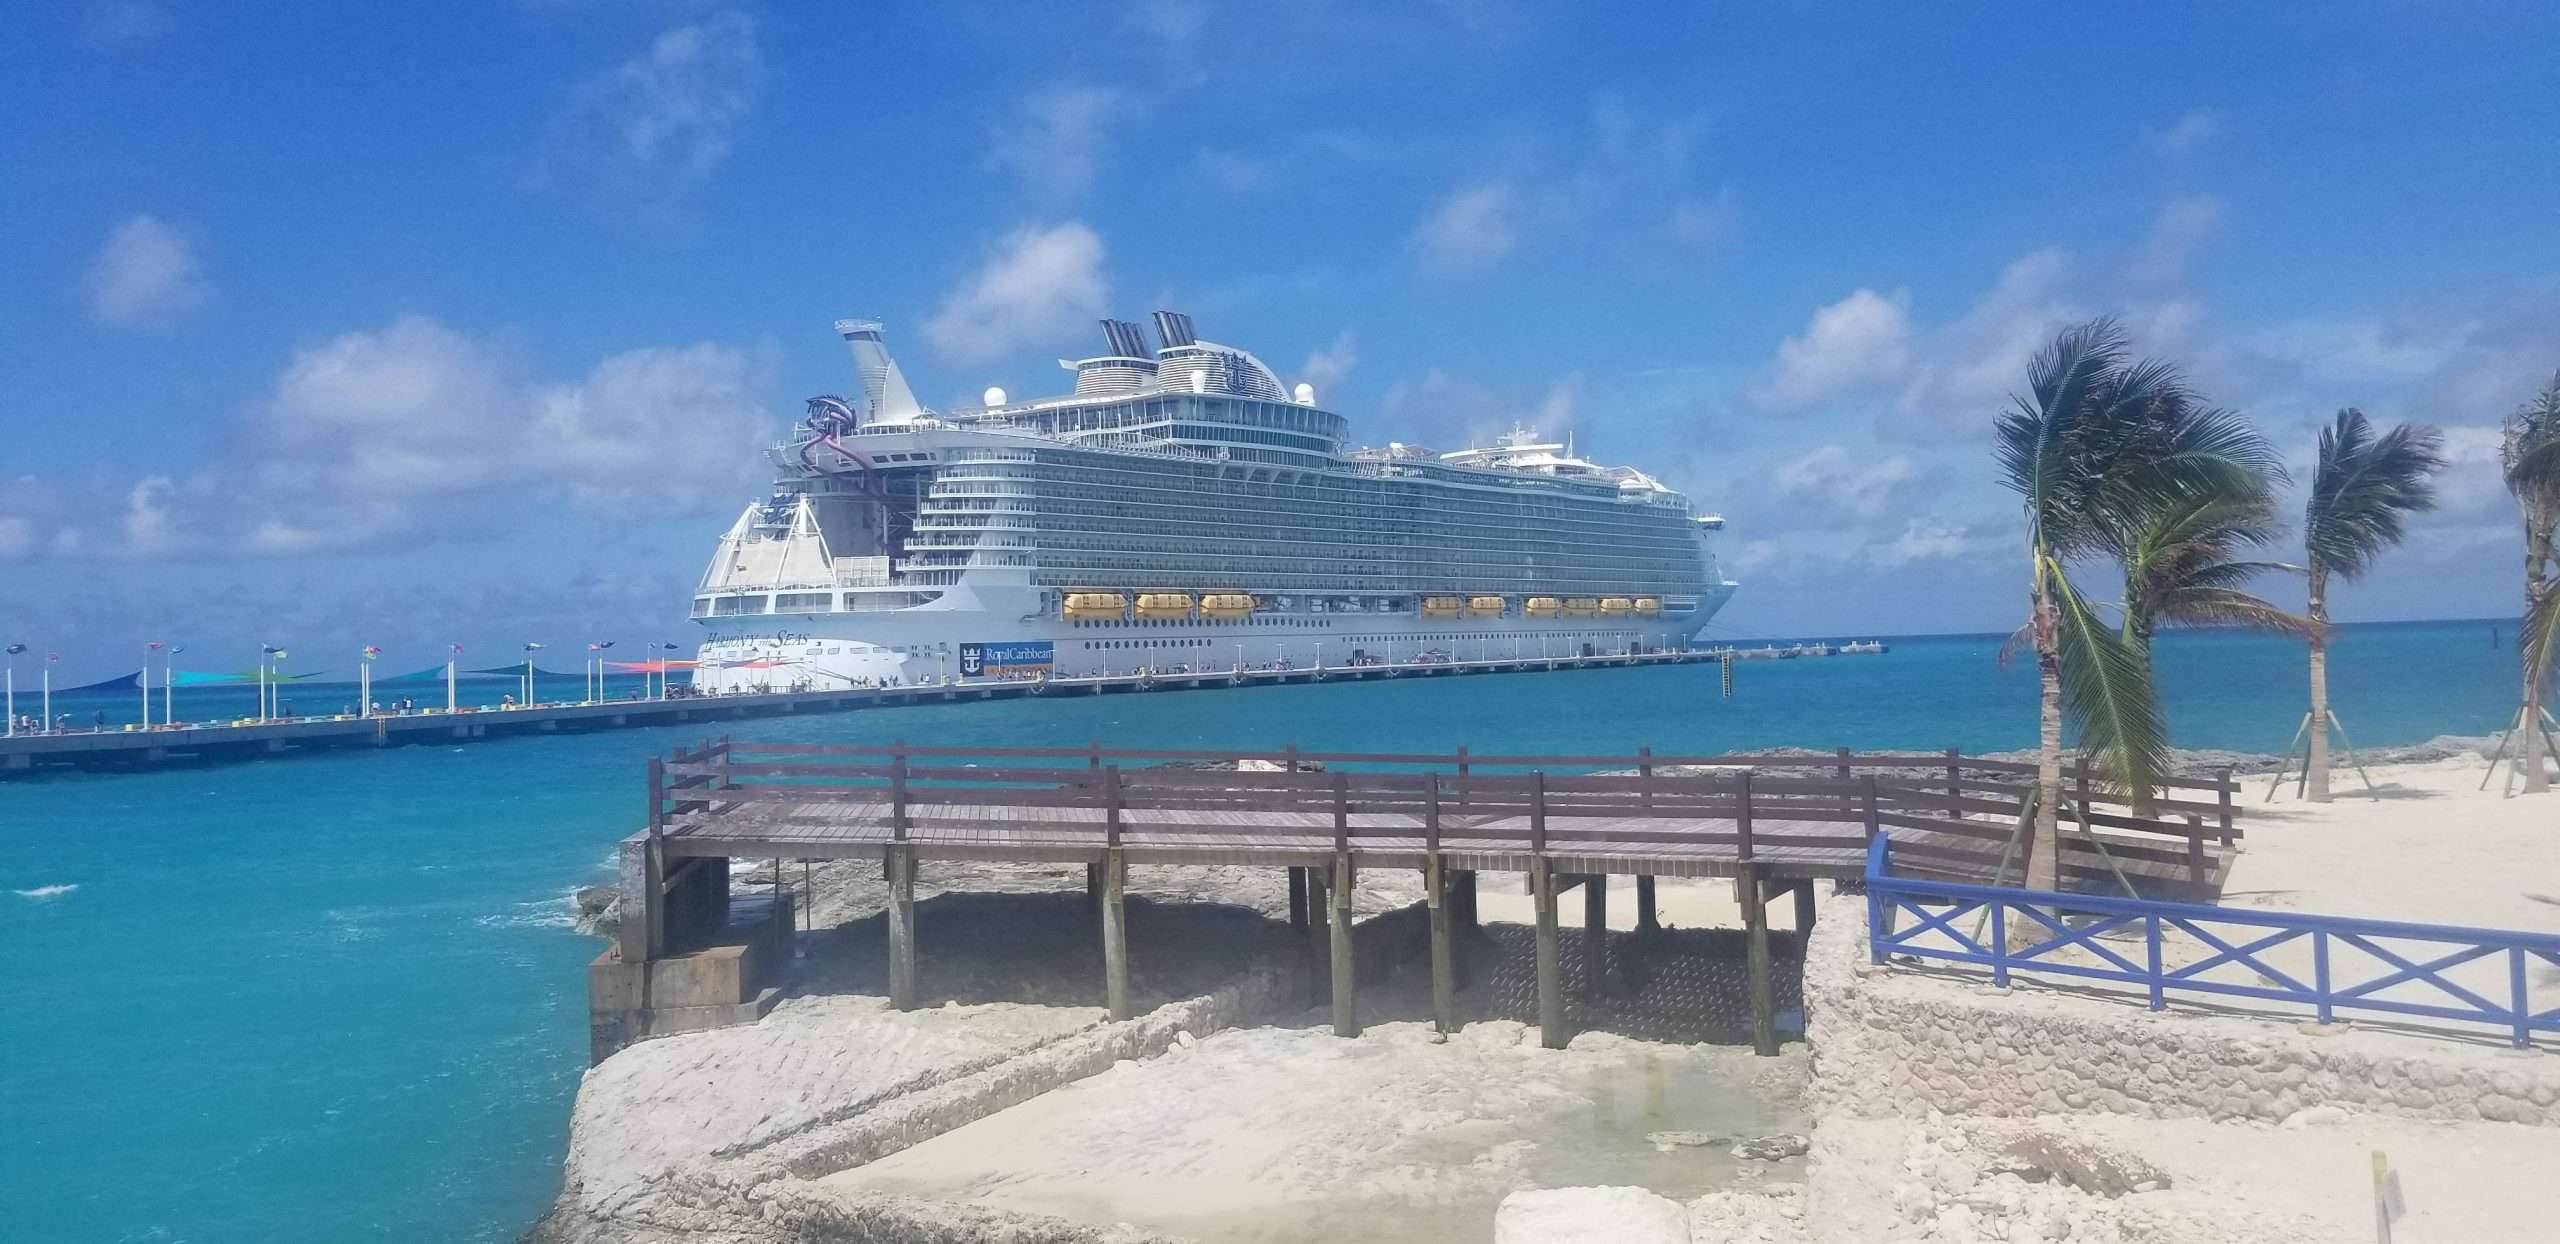 Harmony of the Seas at CocoCay yesterday. We